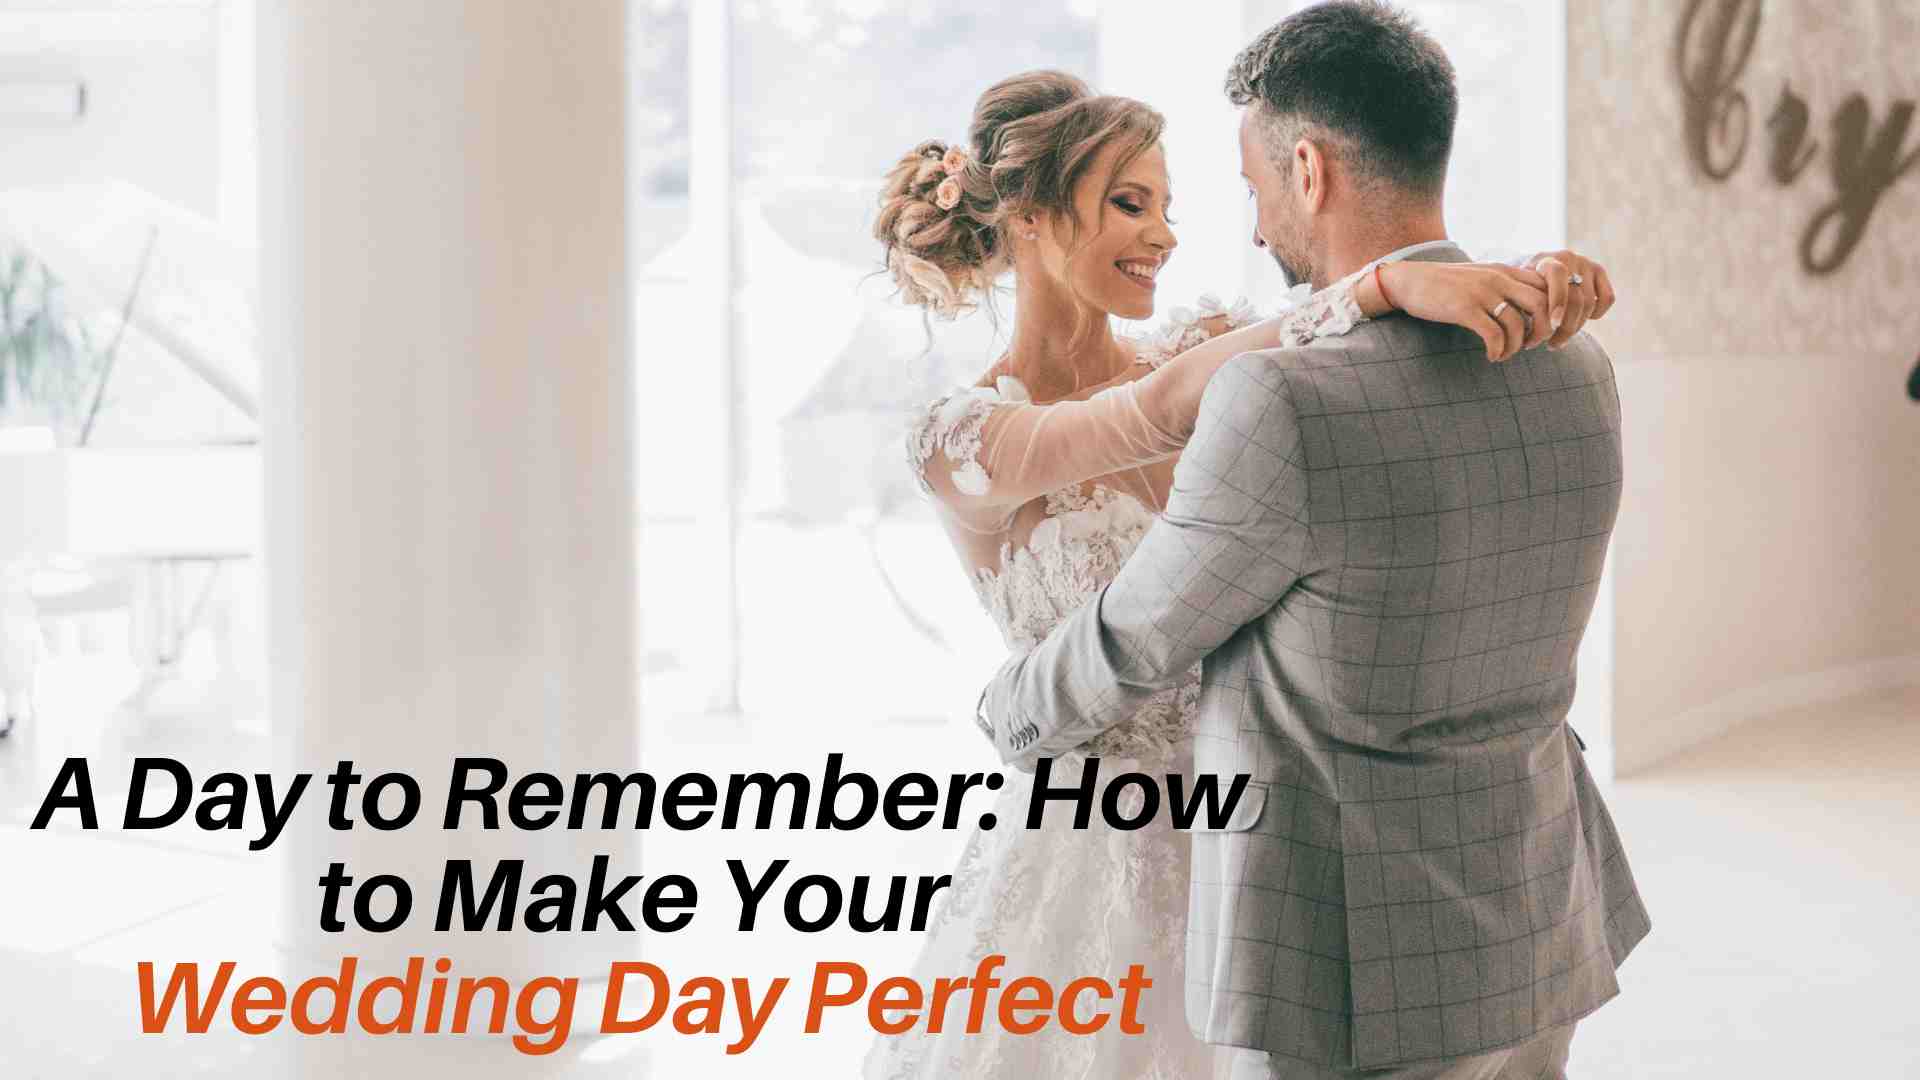 How to Make Your Wedding Day Perfect